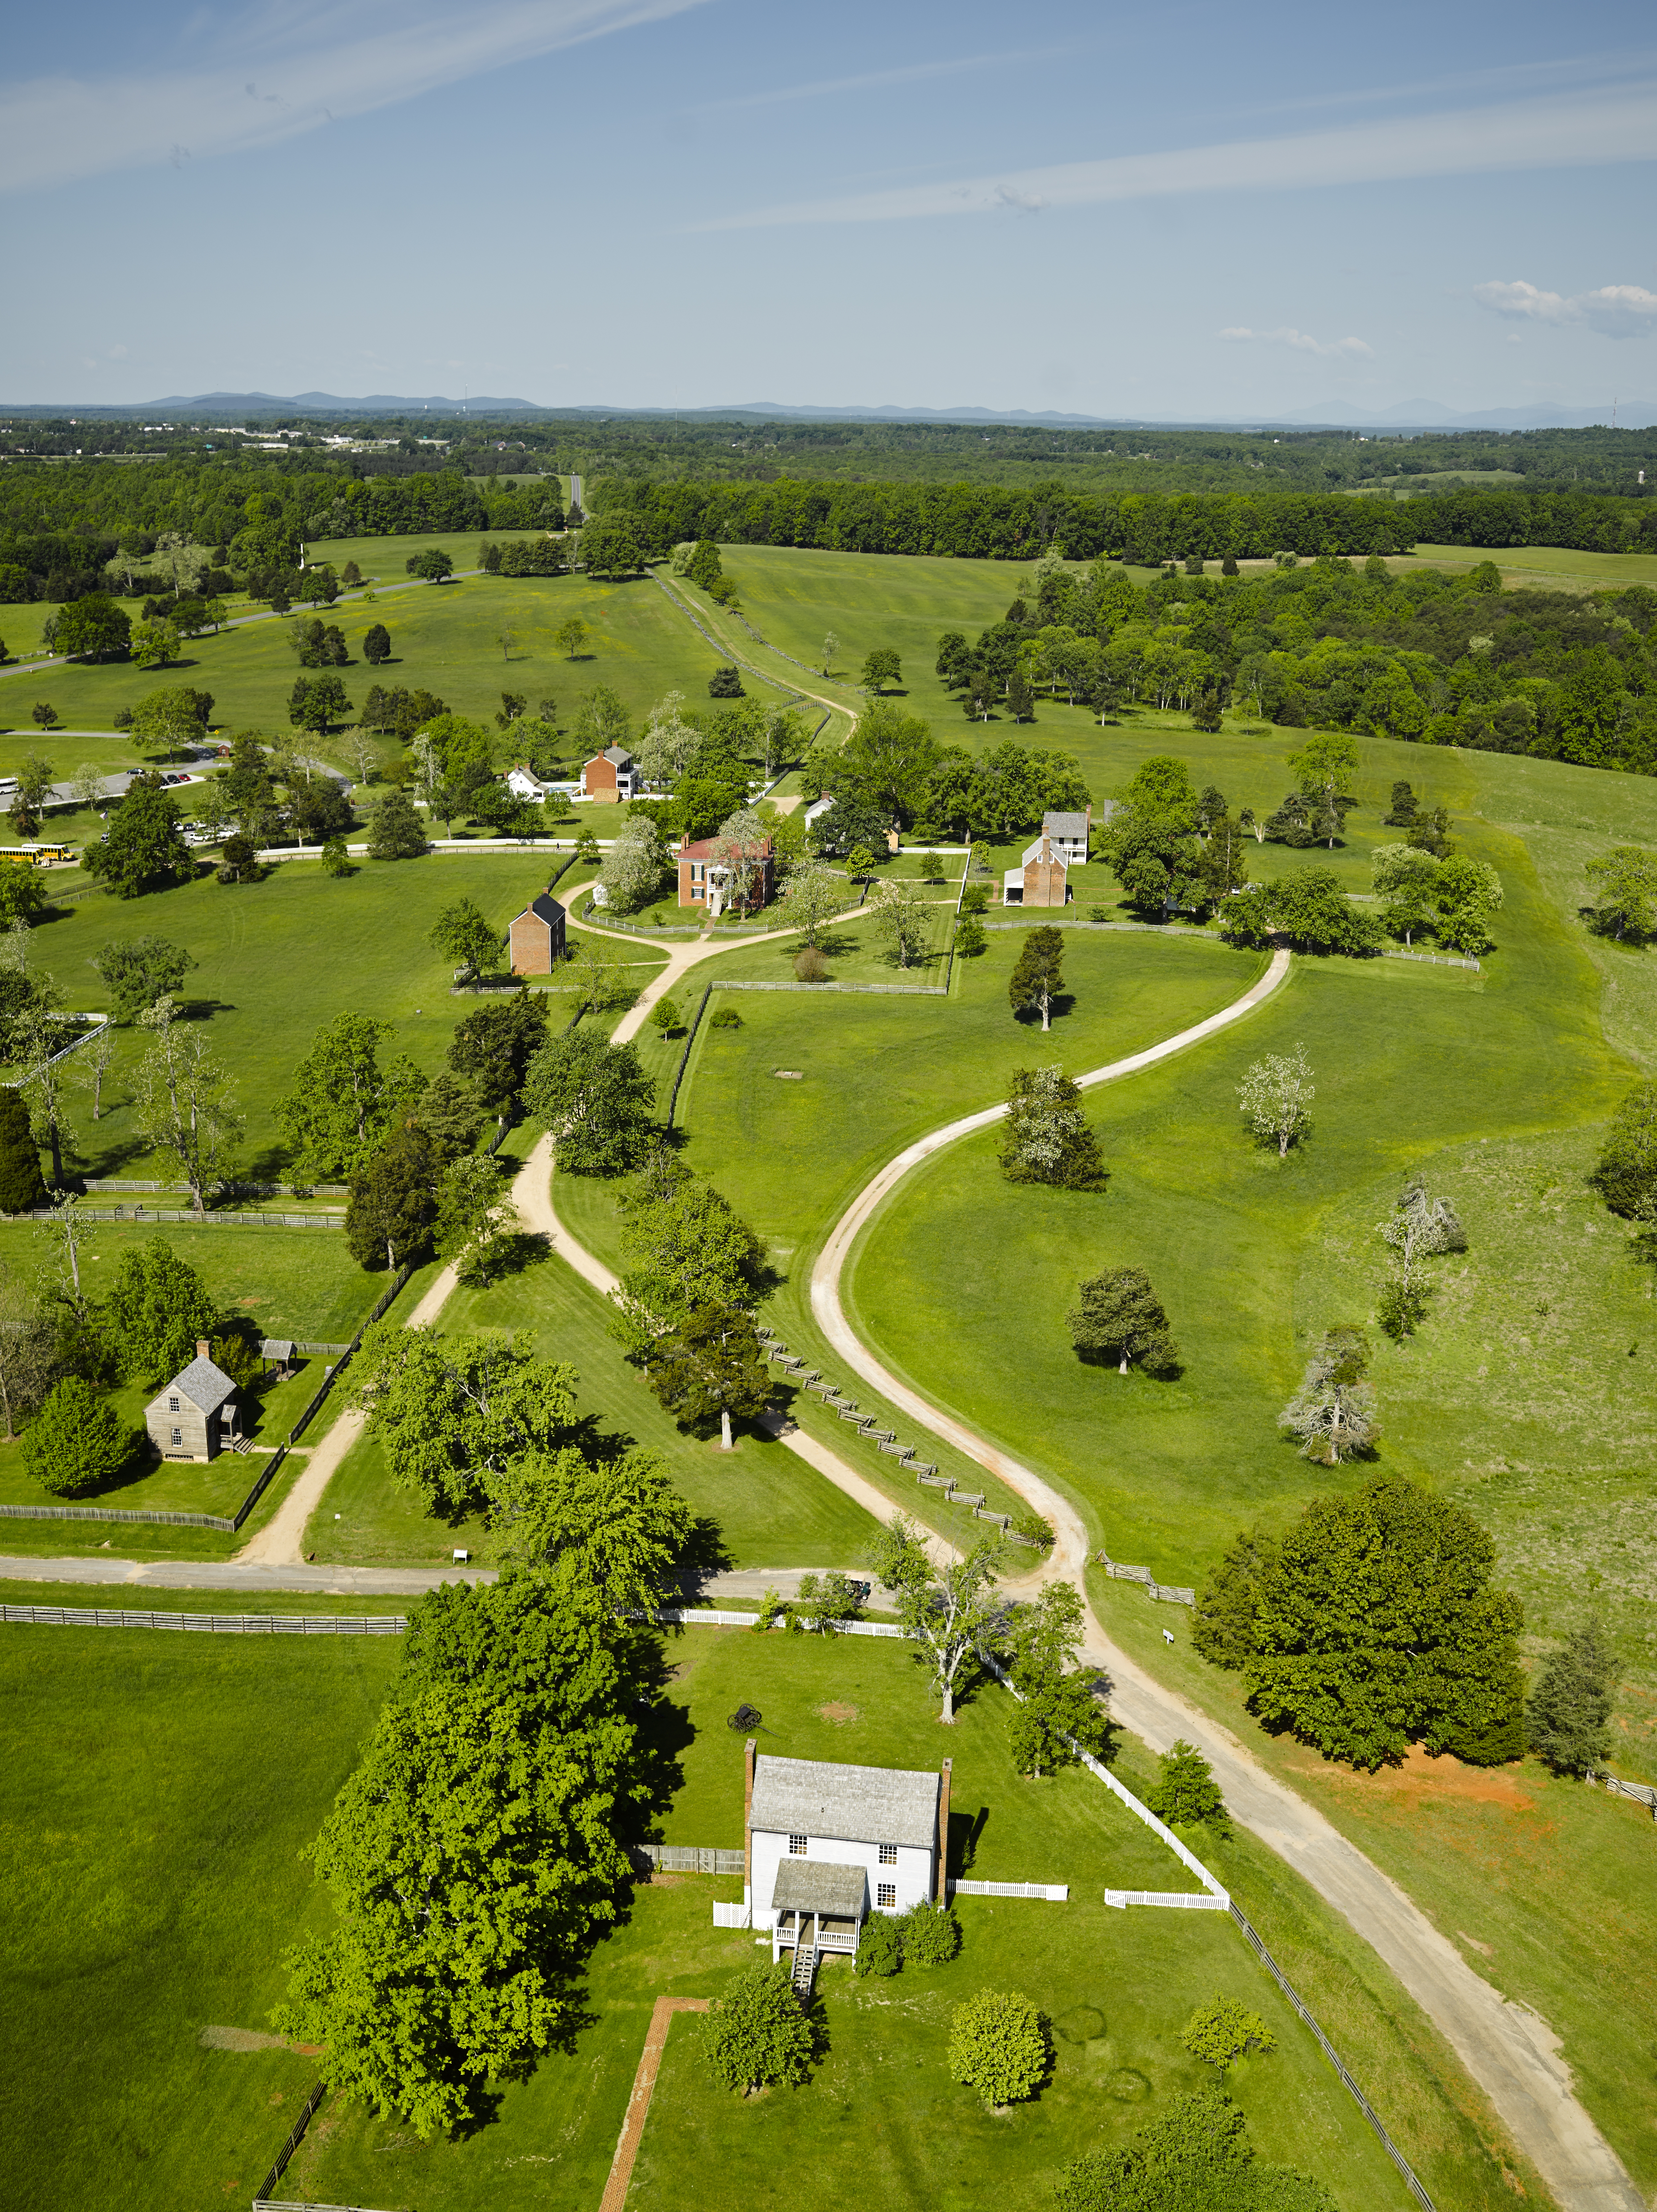 Aerial view of the village of Appomattox Court House taken in 2014.